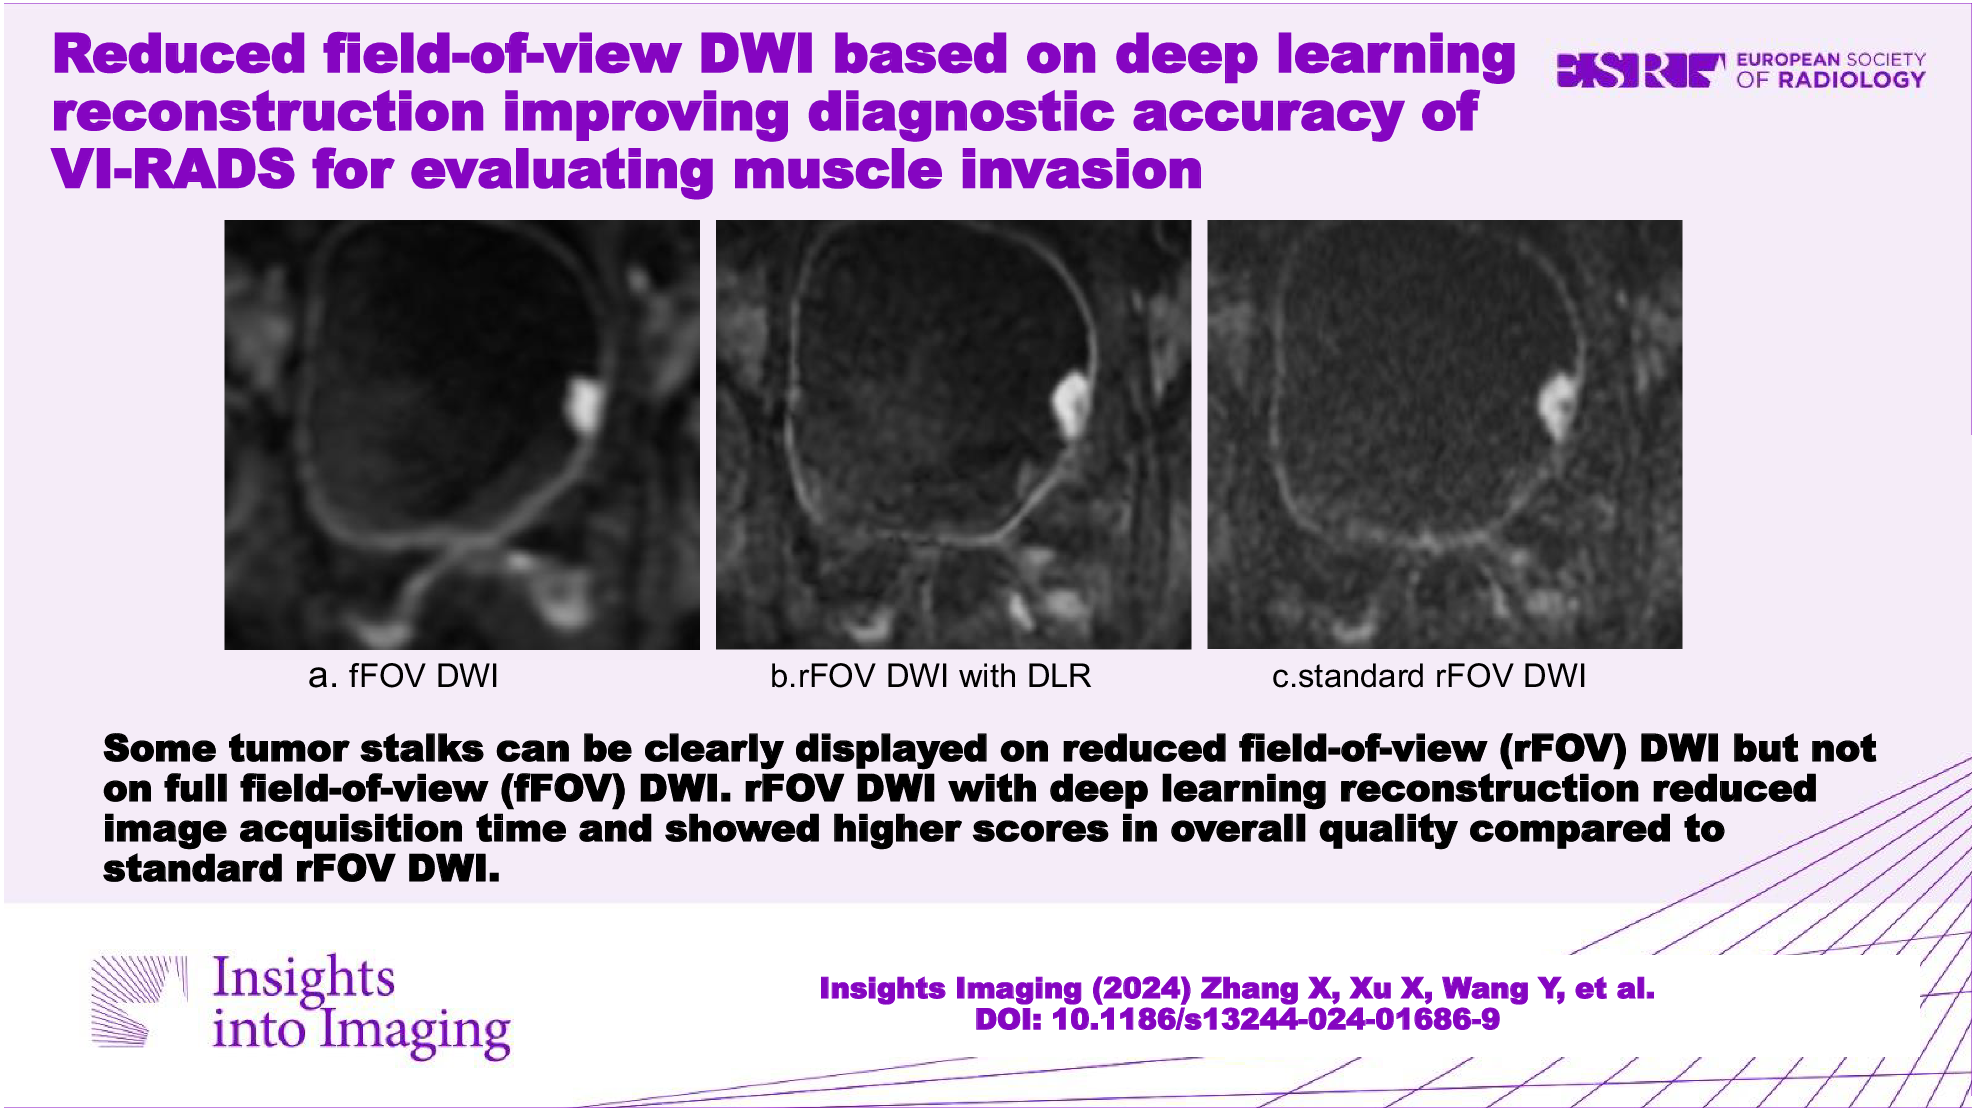 Reduced field-of-view DWI based on deep learning reconstruction improving diagnostic accuracy of VI-RADS for evaluating muscle invasion